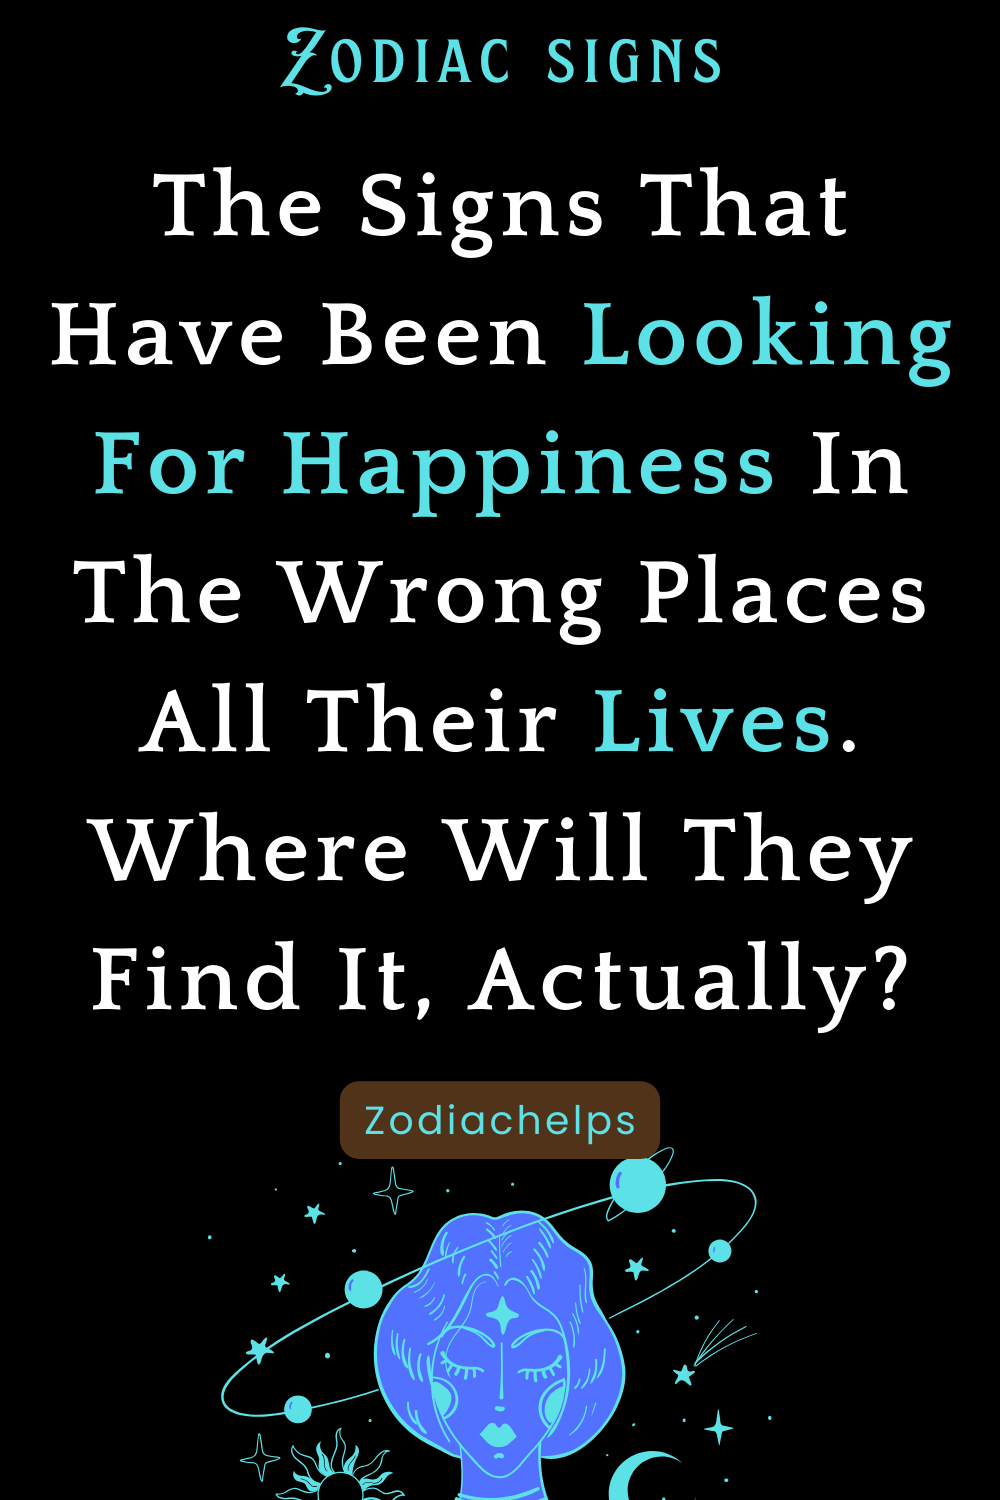 The Signs That Have Been Looking For Happiness In The Wrong Places All Their Lives. Where Will They Find It, Actually!